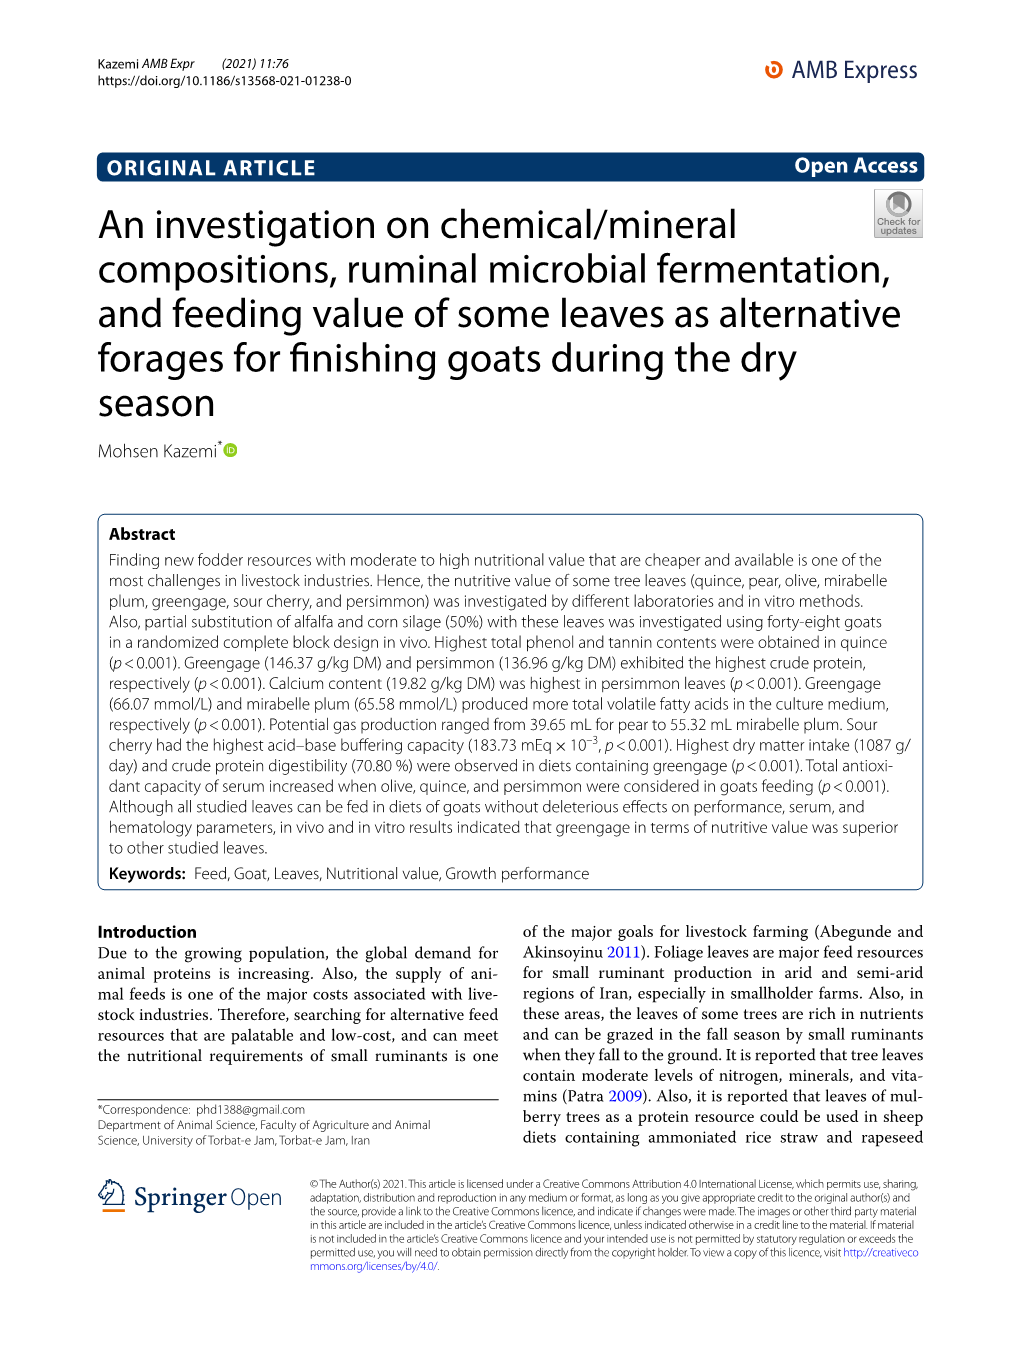 An Investigation on Chemical/Mineral Compositions, Ruminal Microbial